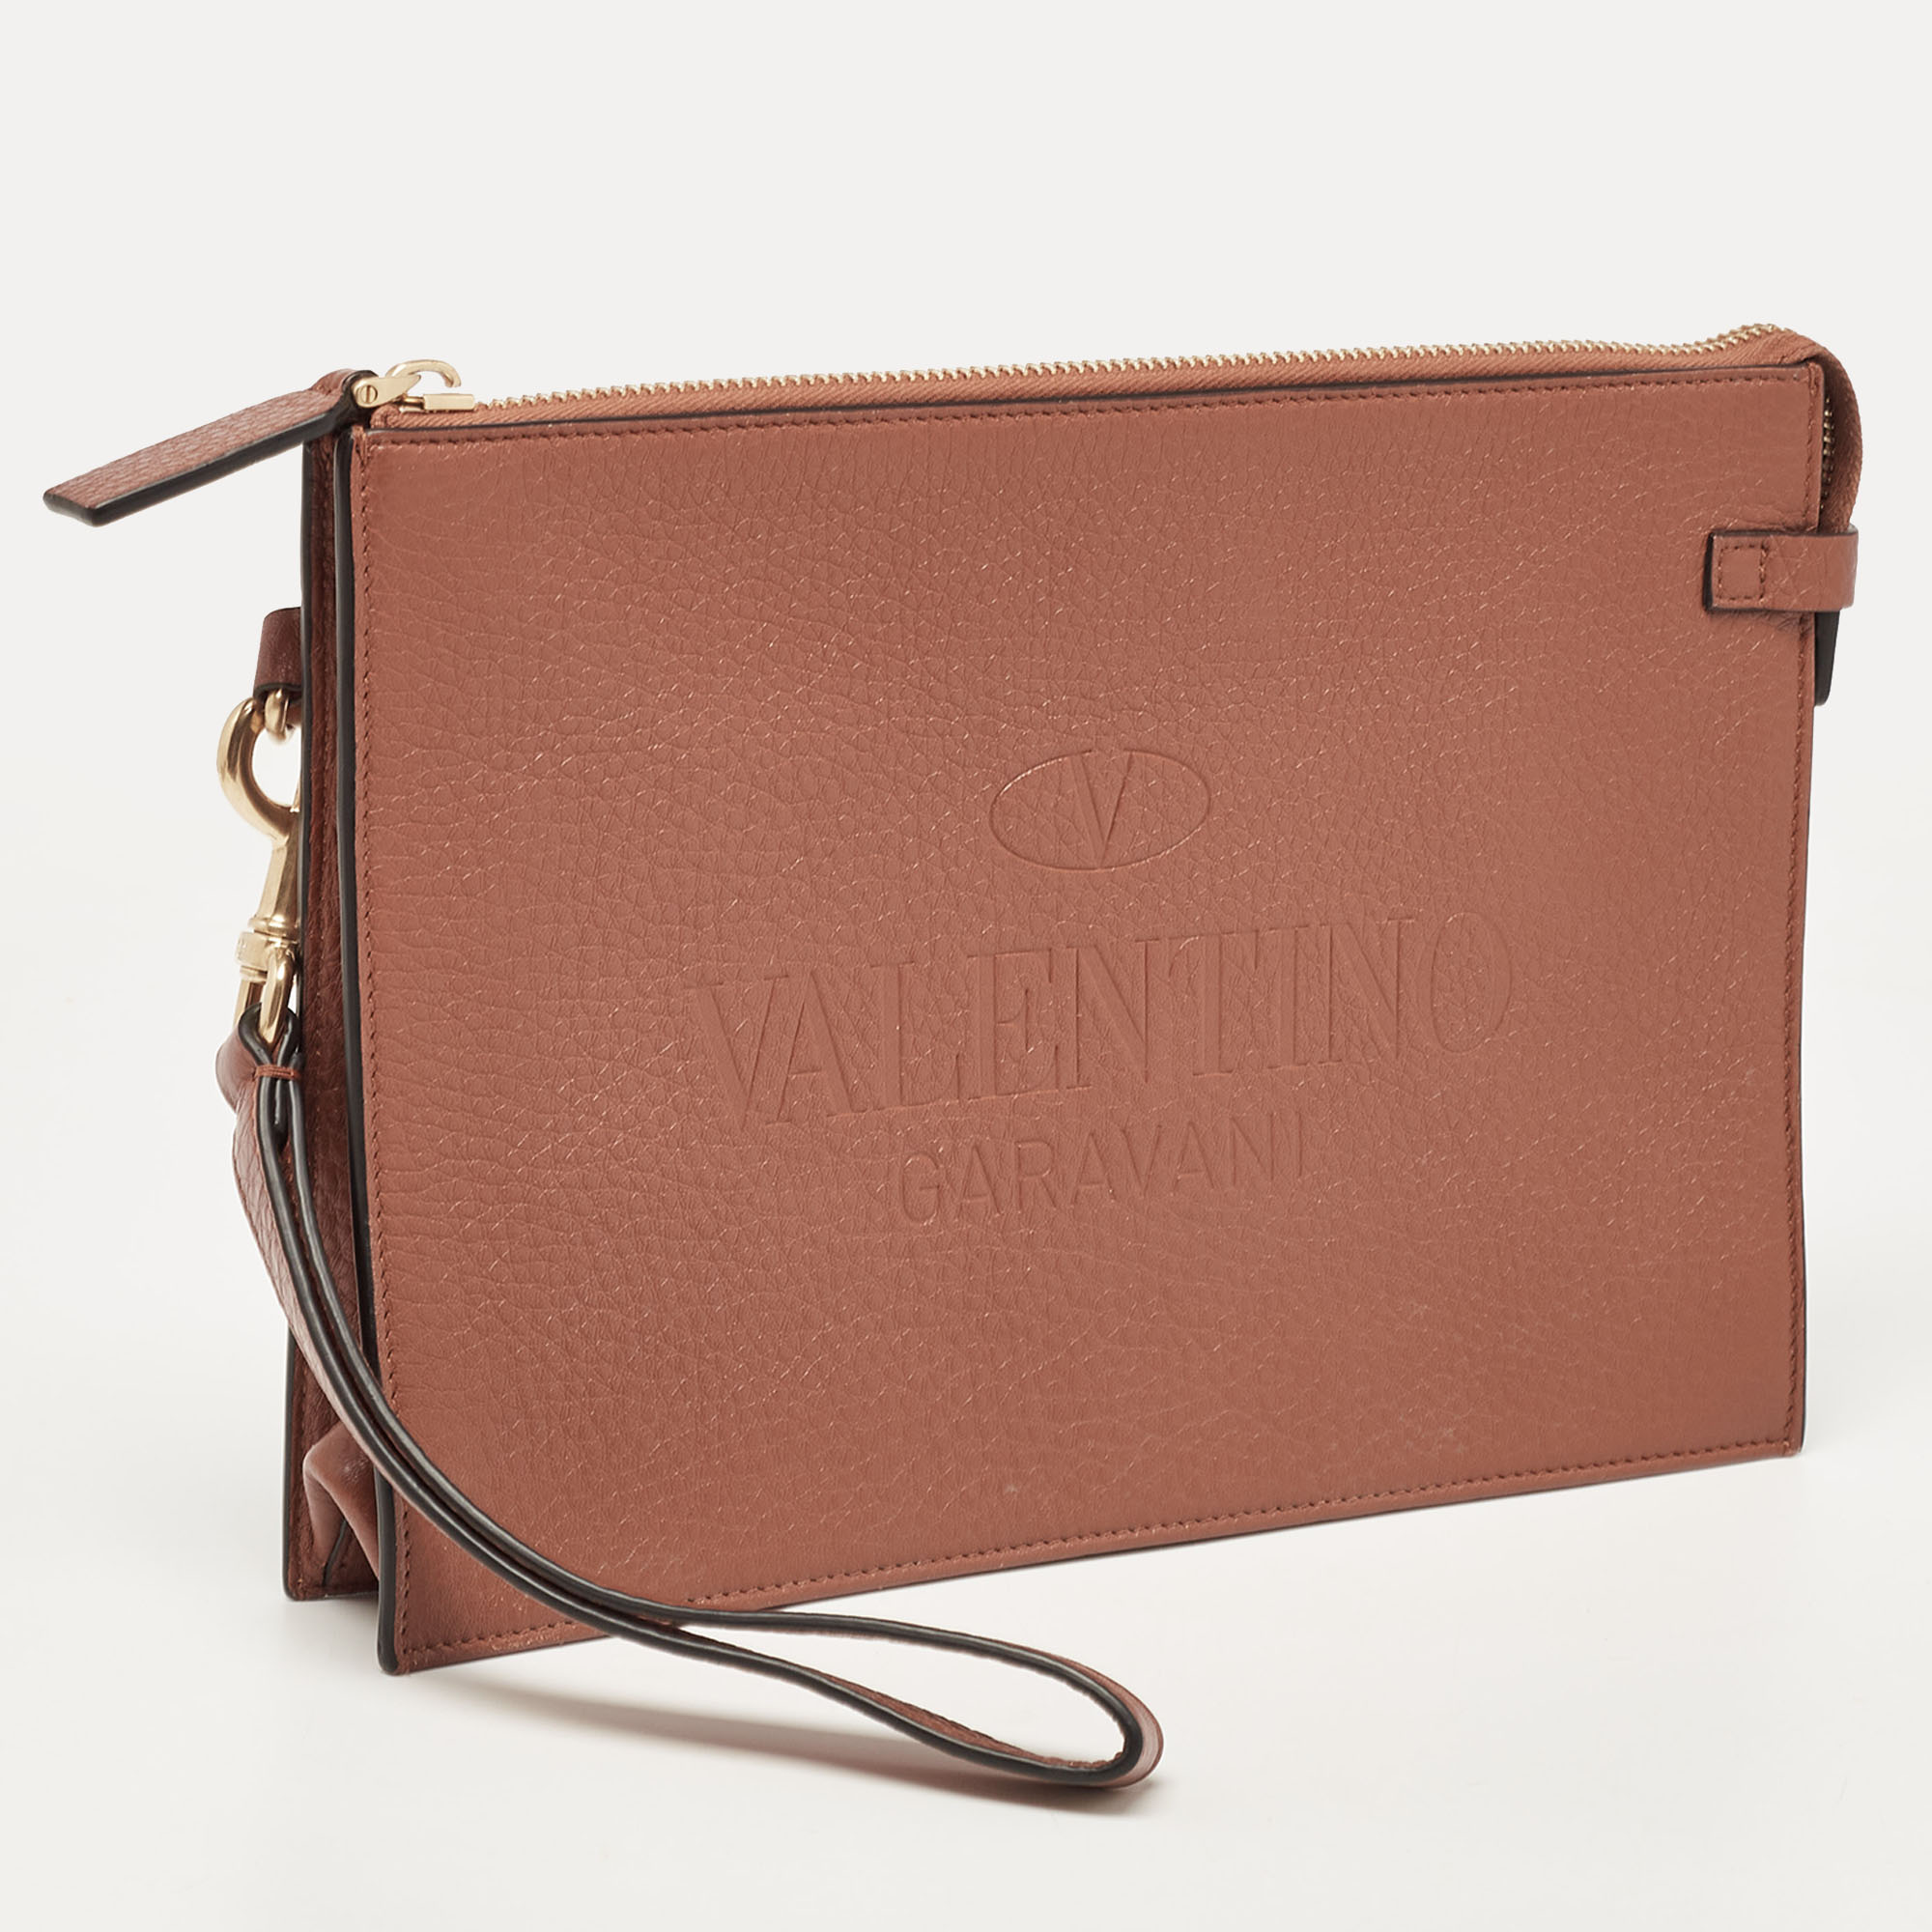 Valentino Brown Leather Logo Embossed Wristlet Clutch